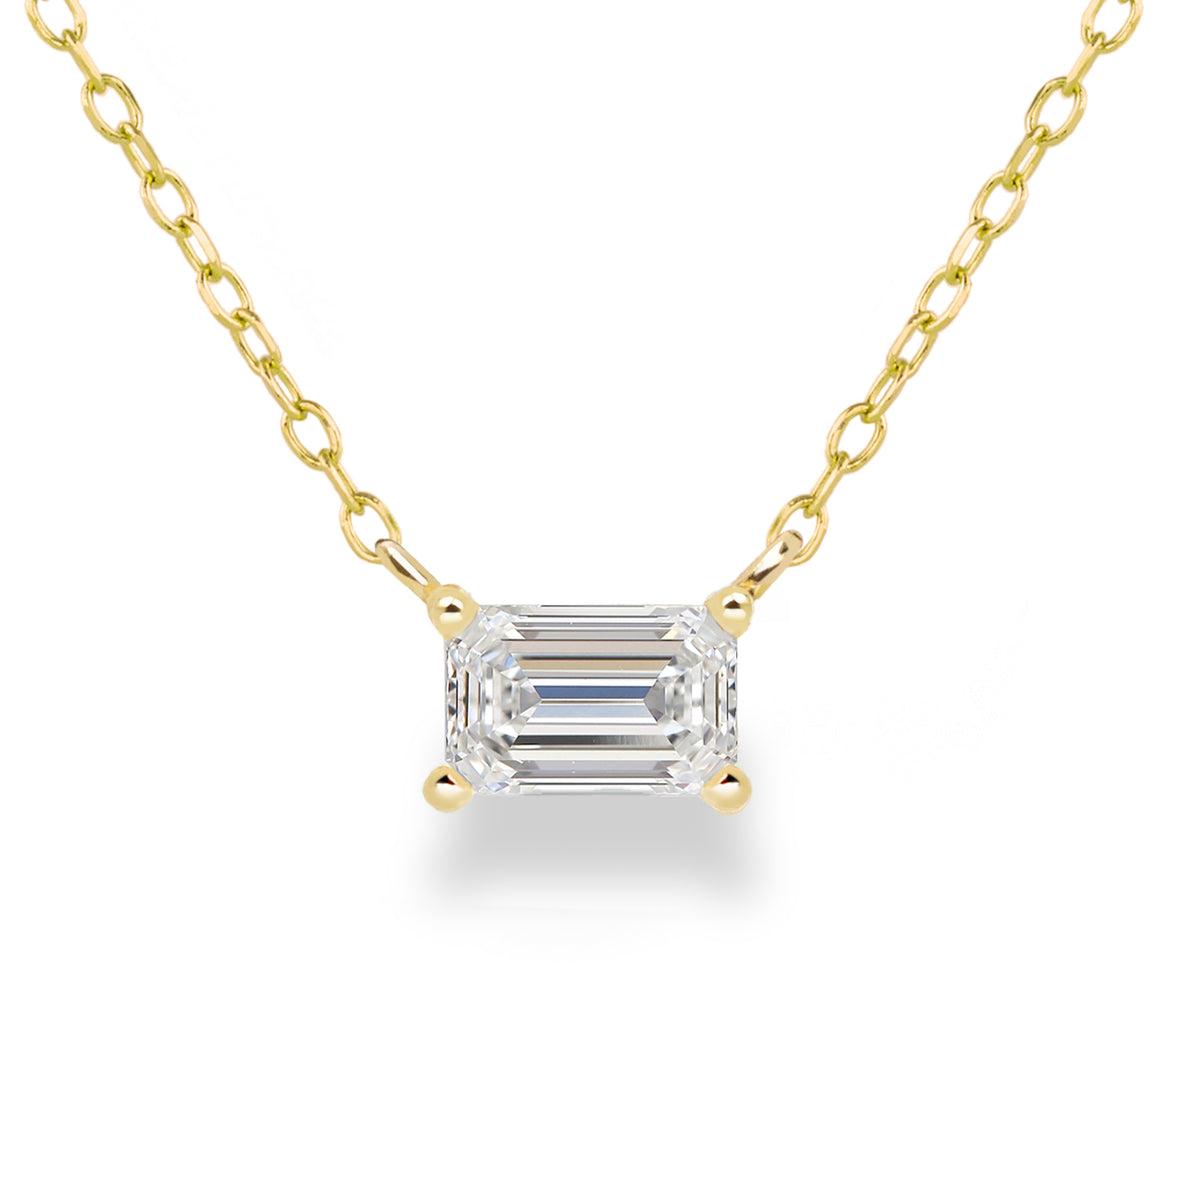 Jamie Park Jewelry Emerald Cut Diamond Solitaire Necklace This Emerald Diamond Solitaire Necklace features a sparkling lab diamond, set in a classic four prong design. With each diamond certified by IGI, this necklace makes for a timeless and cherished gift, perfect for any special occasion. Add a touch of elegance to any outfit with this beautiful piece. Chain length 16-18&quot;&amp;nbsp;